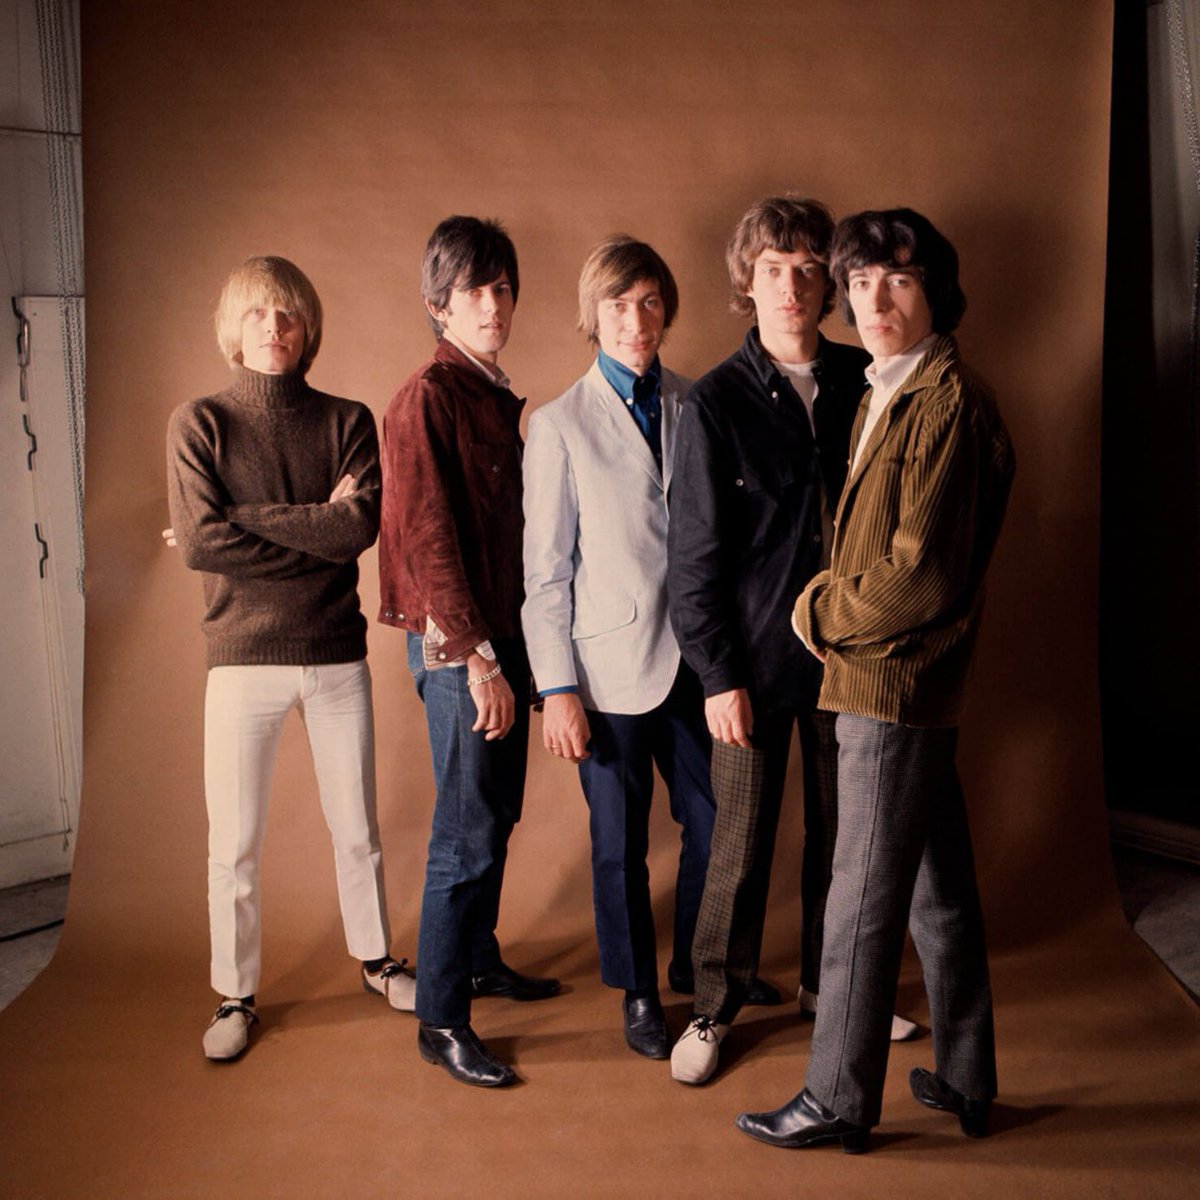 In 1965 Gered Mankowitz had his first photo shoot with the Rolling Stones at Mason’s Yard Studio in London, this is the only surviving colour photo from that shoot! 📸